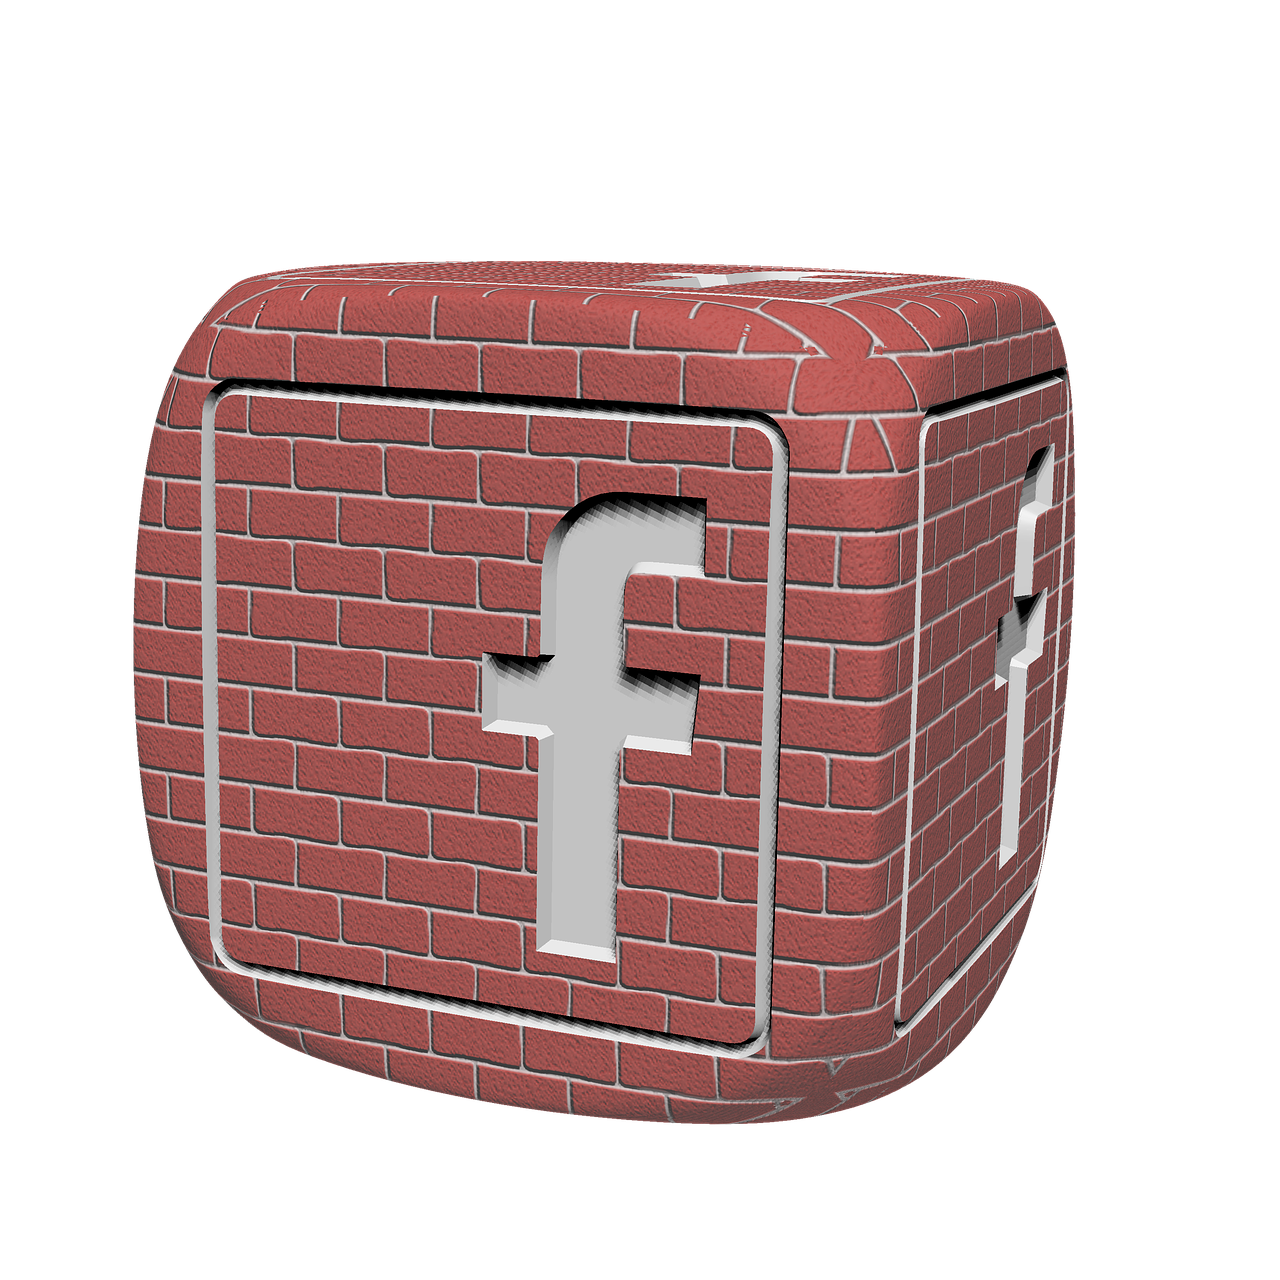 facebook cube network free photo